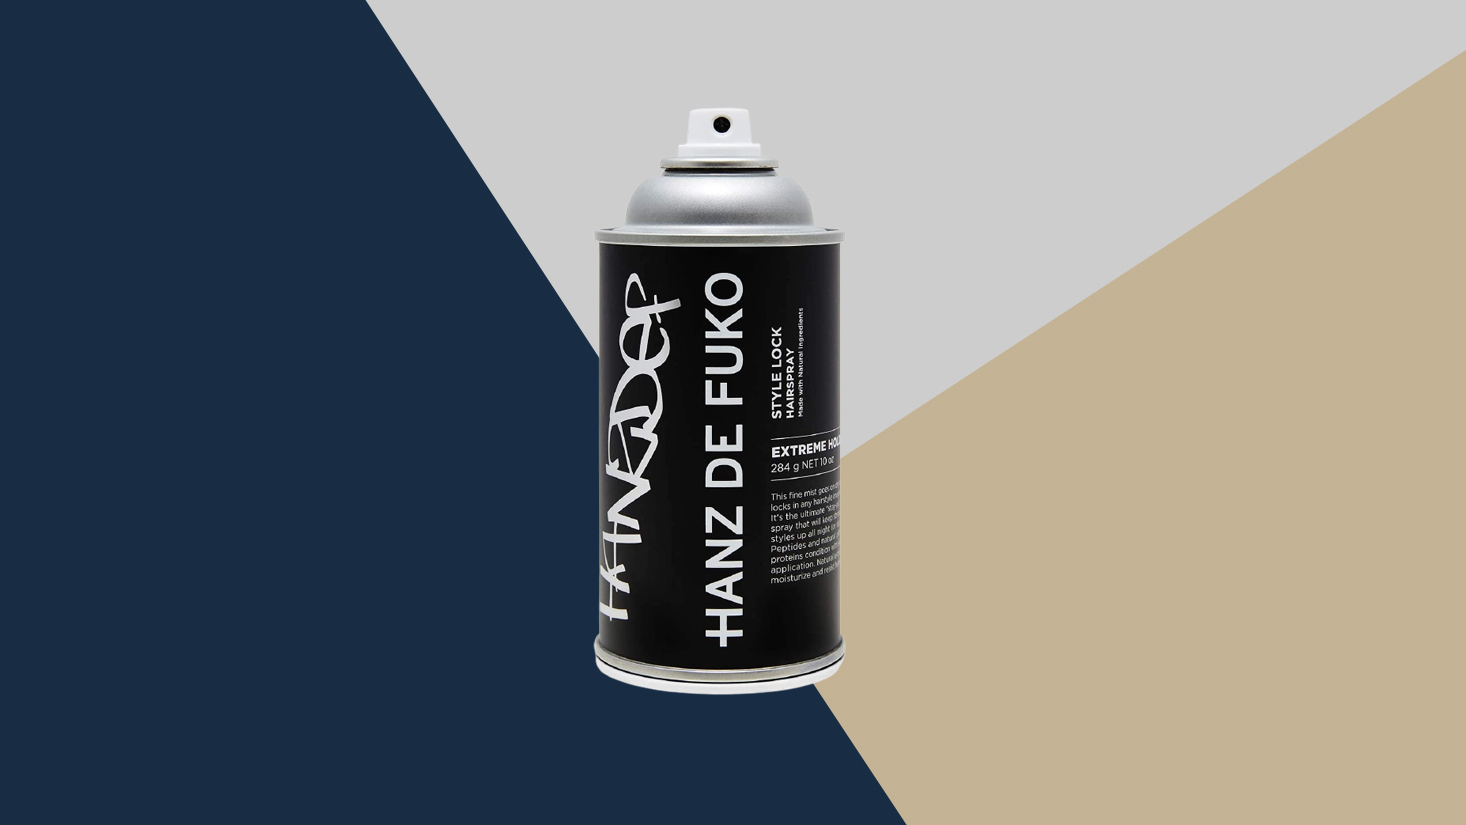 Hair spray for men for firm and loose hold hairstyles